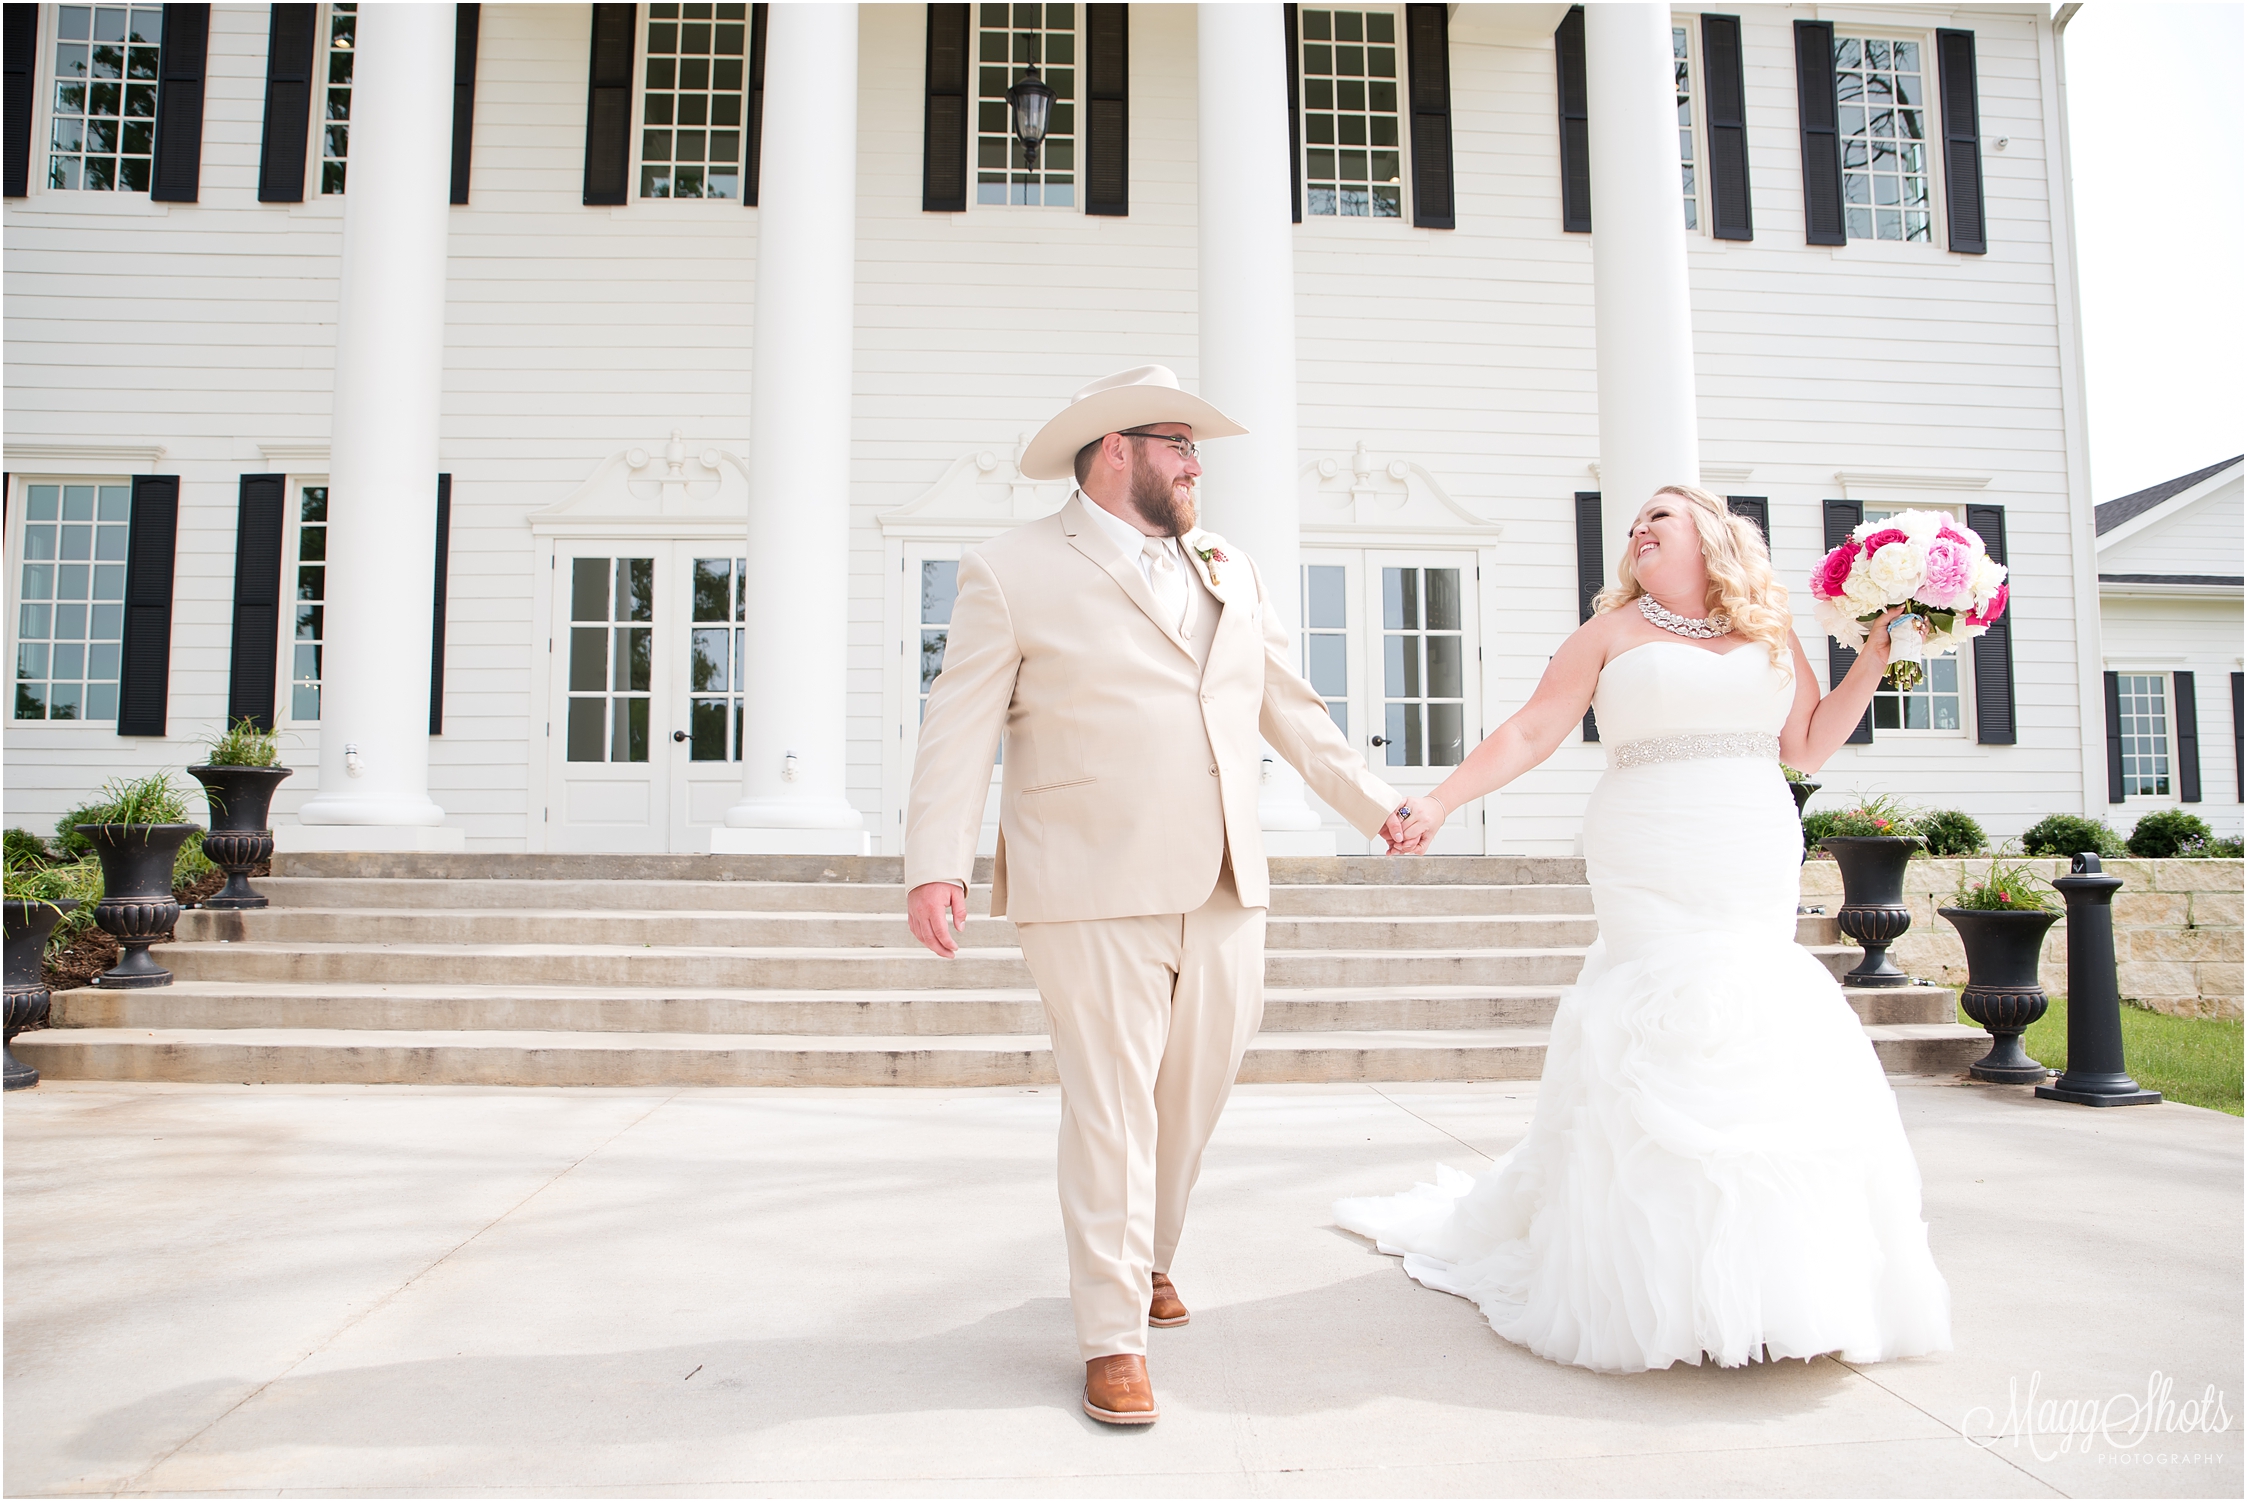 Wedding Blog Tips Bride and Groom Love White Cowboy Hat MaggShots Photography MaggShots Professional Photographer Professional Photography